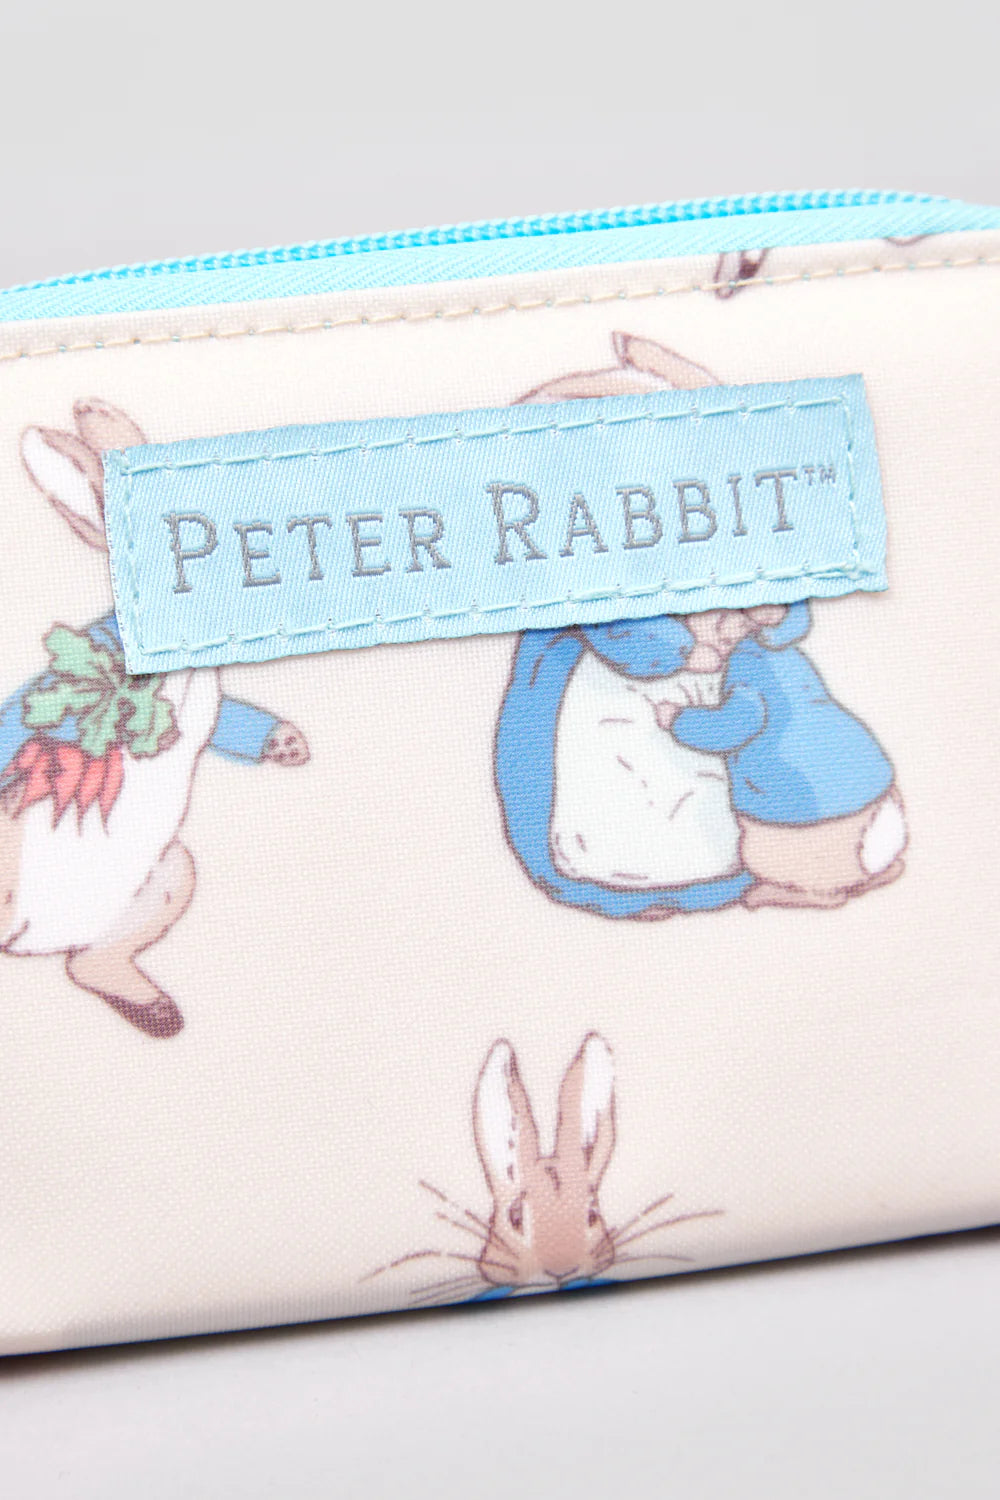 Peter Rabbit Coin Purse, Blue - Bags & Gifts - The British Museum